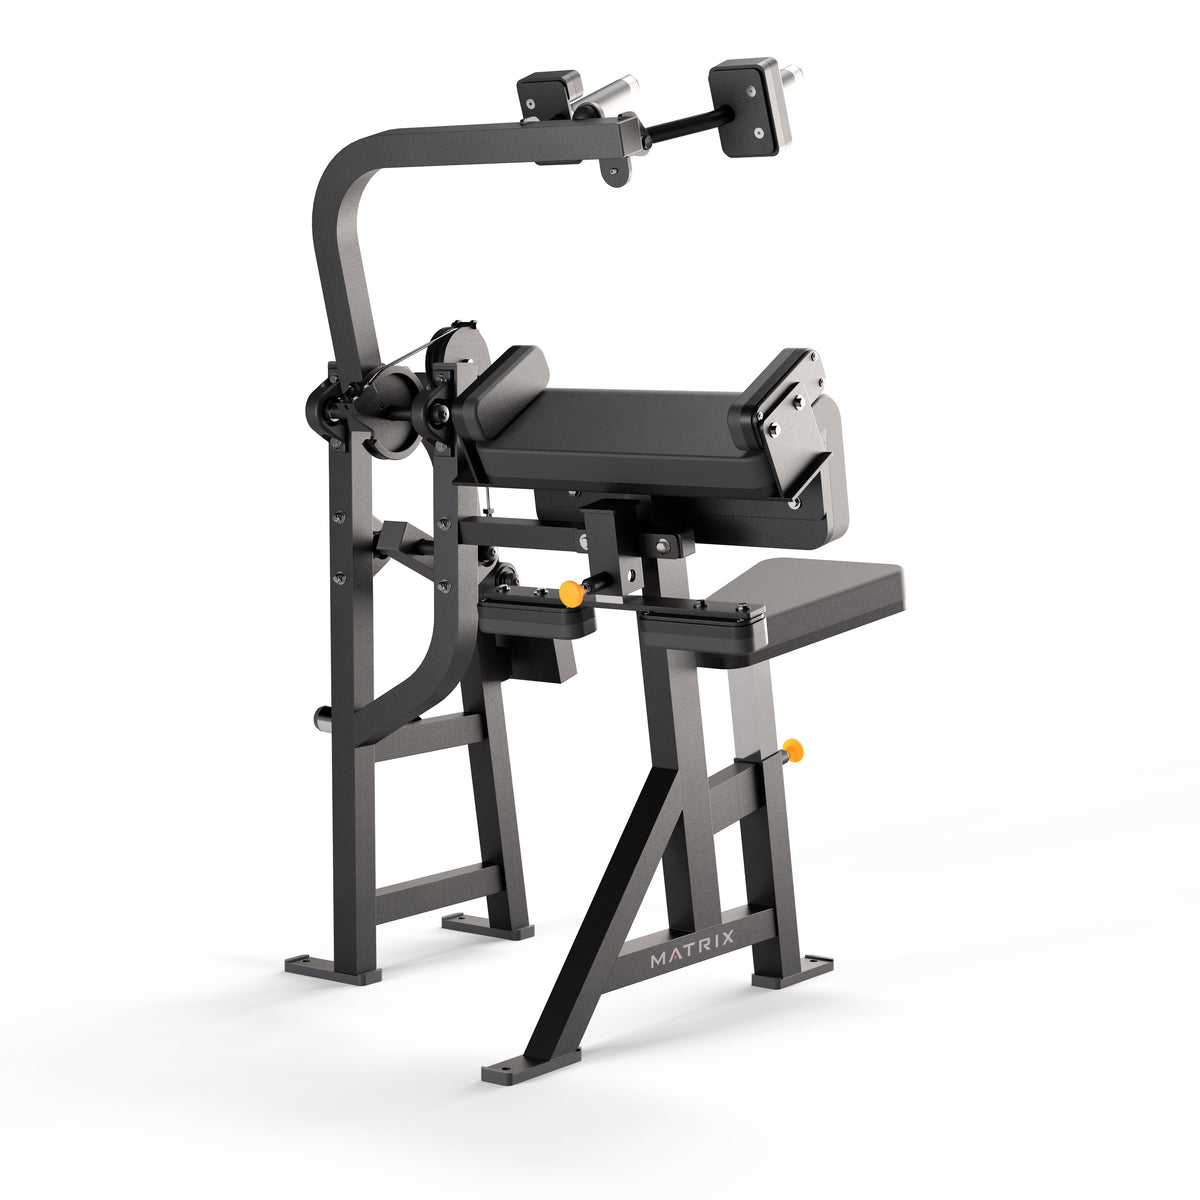 Matrix Fitness Varsity Triceps Extension | Fitness Experience